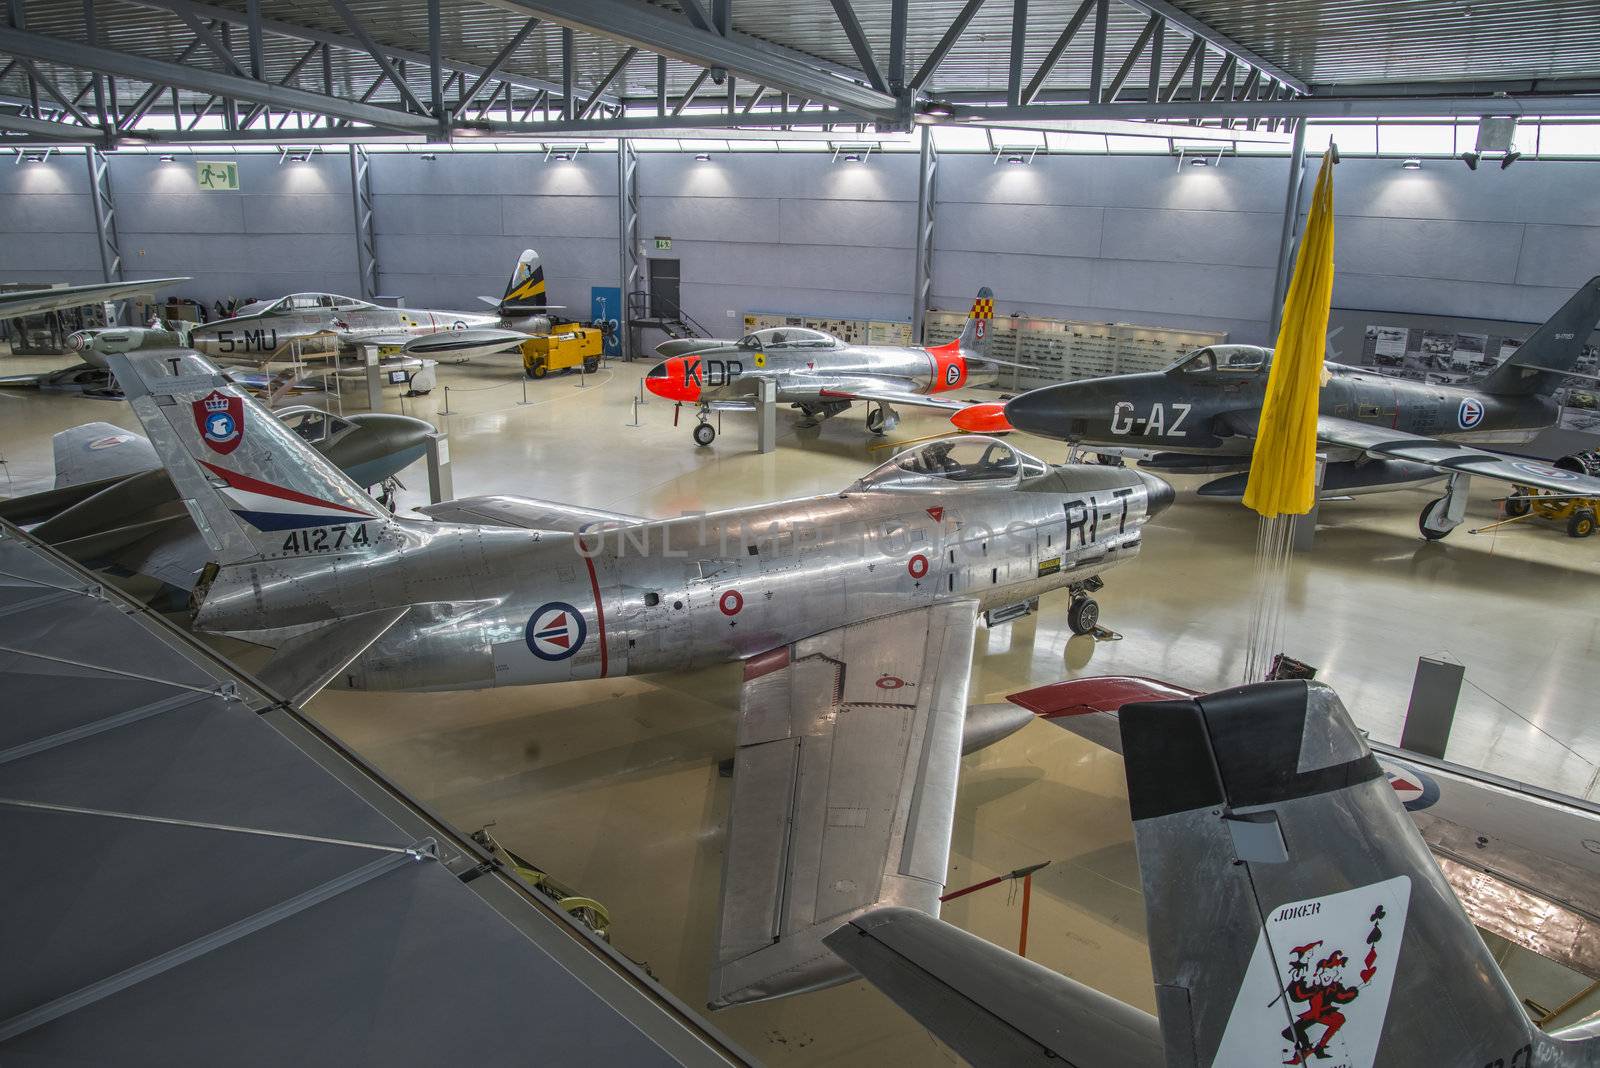 north american f-86 sabre (sometimes called the sabrejet) was a transonic jet fighter aircraft, the pictures are shot in march 2013 by norwegian armed forces aircraft collection which is a military aviation museum located at gardermoen, north of oslo, norway.